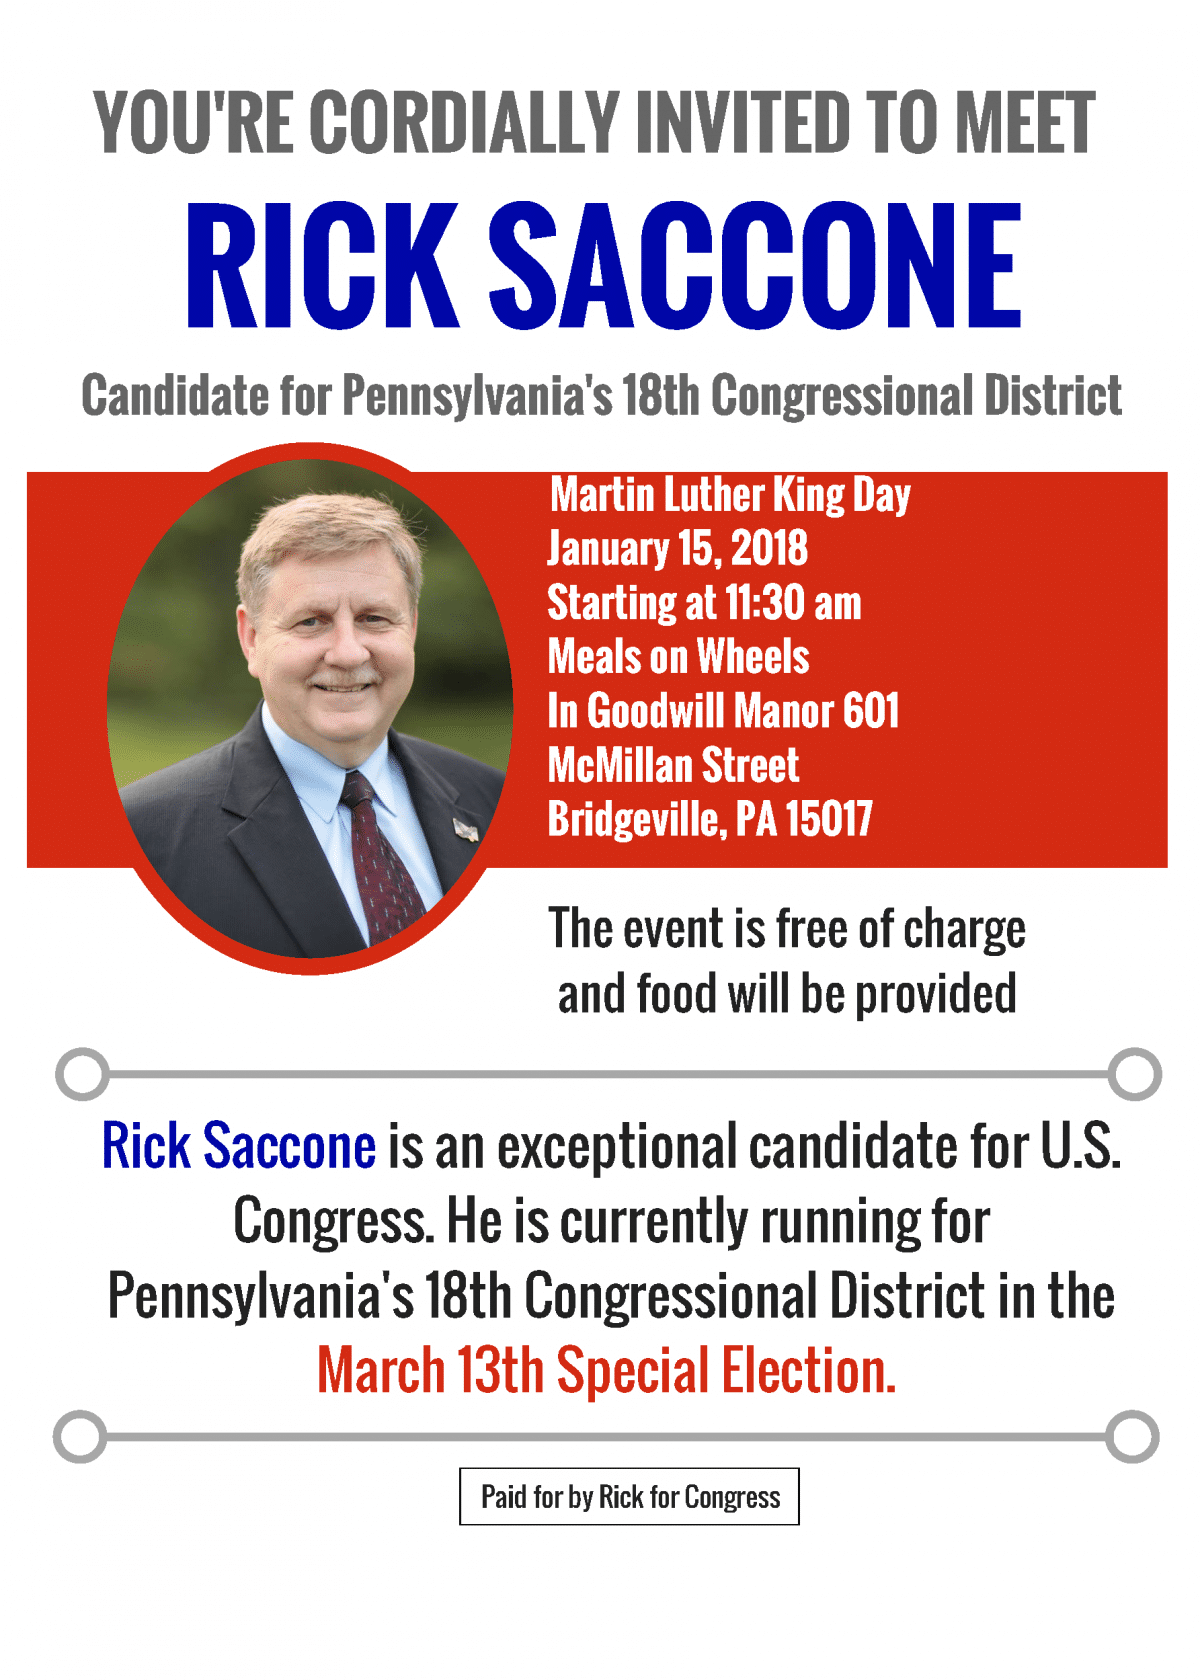 U.S. Congressional candidate Rick Saccone is holding a meet and greet at Goodwill Manor in Bridgeville at 11:30 a.m. on Jan. 15, 2018.